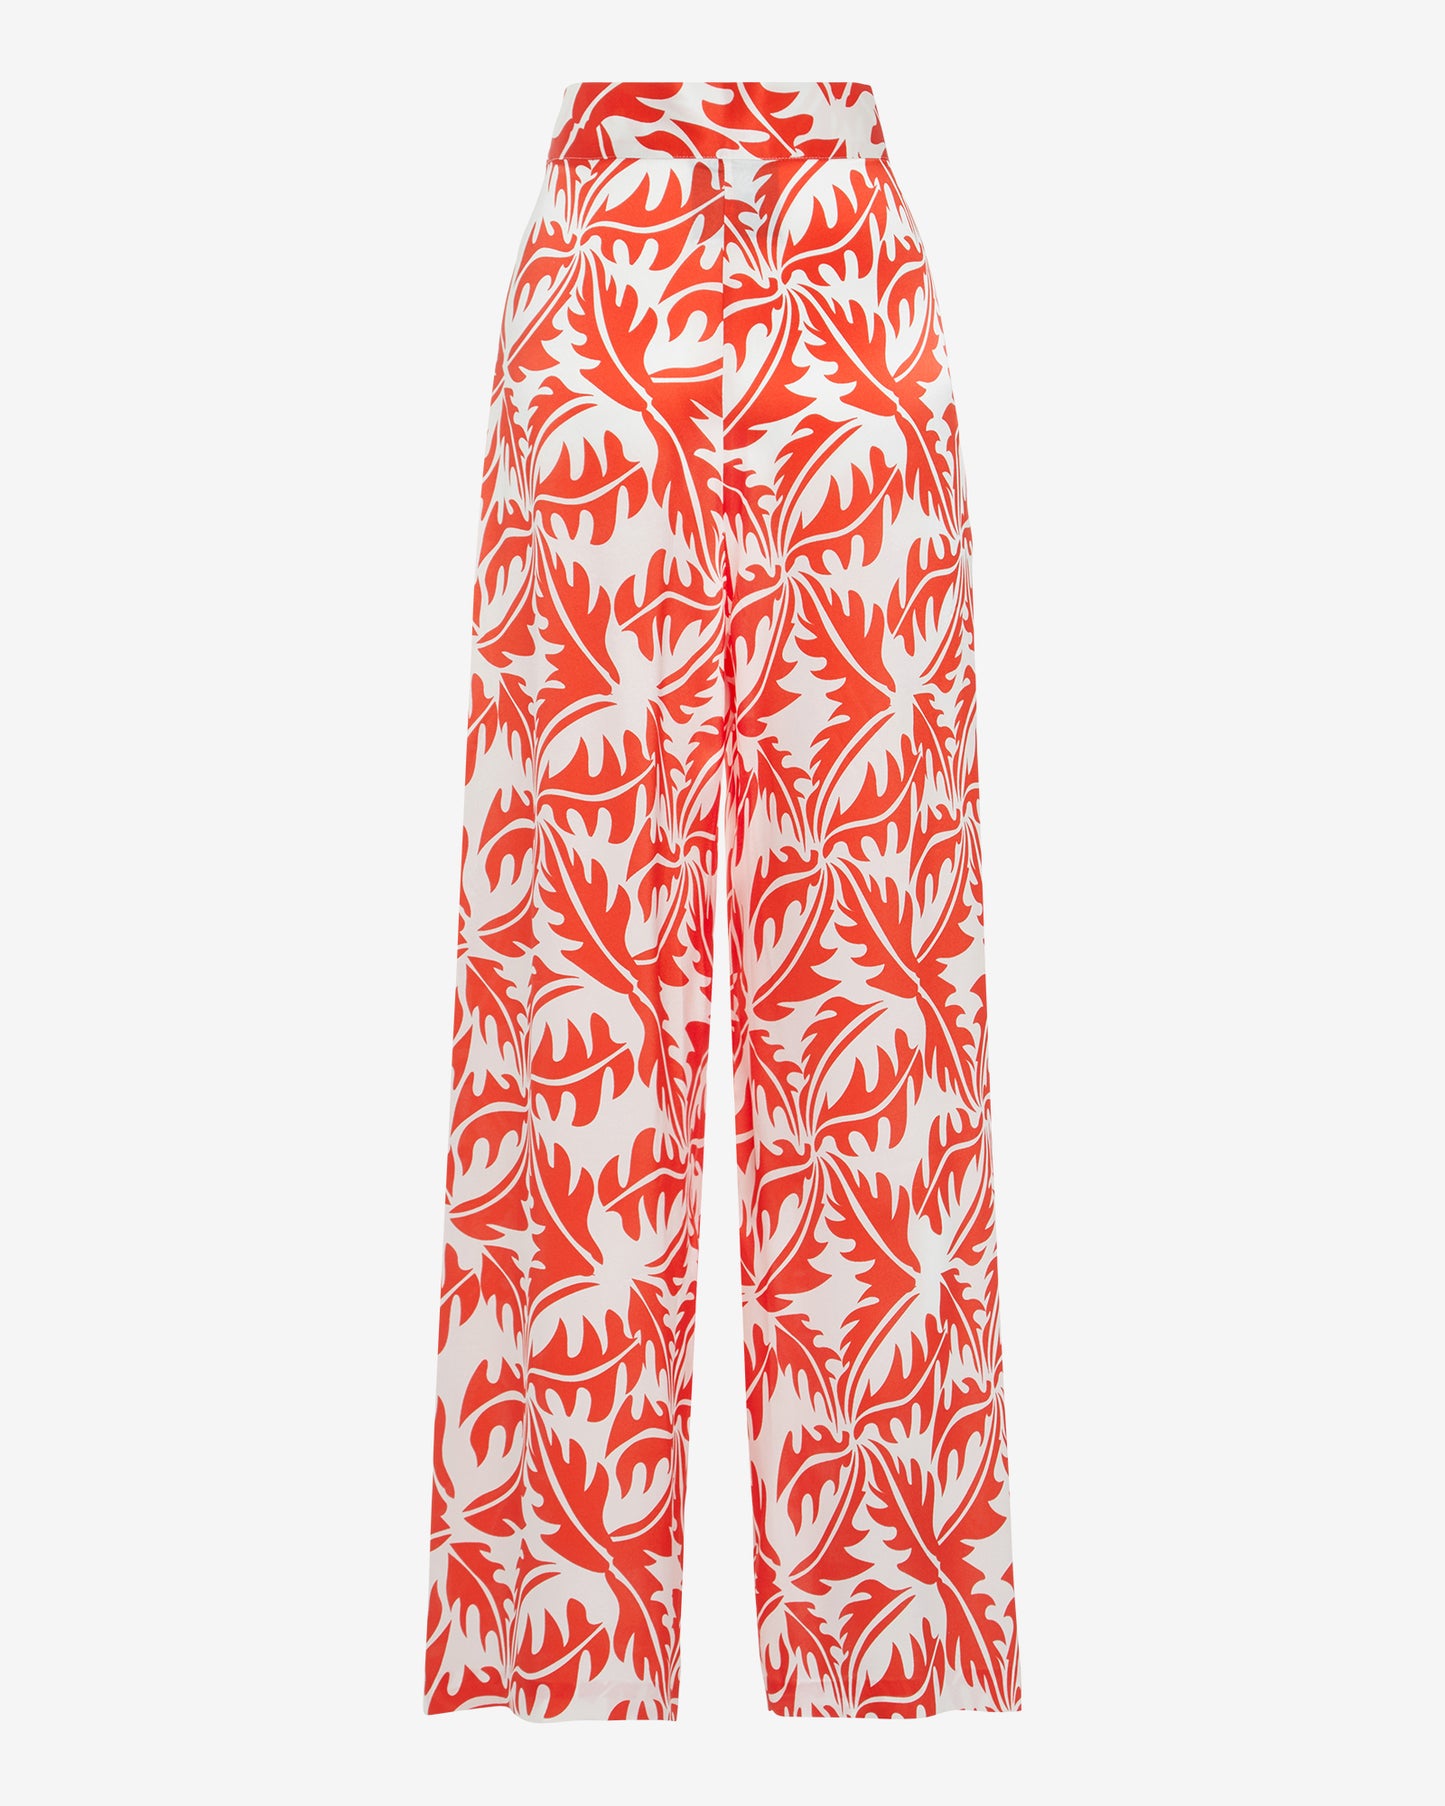 The Red Psychedelic Silk Pants